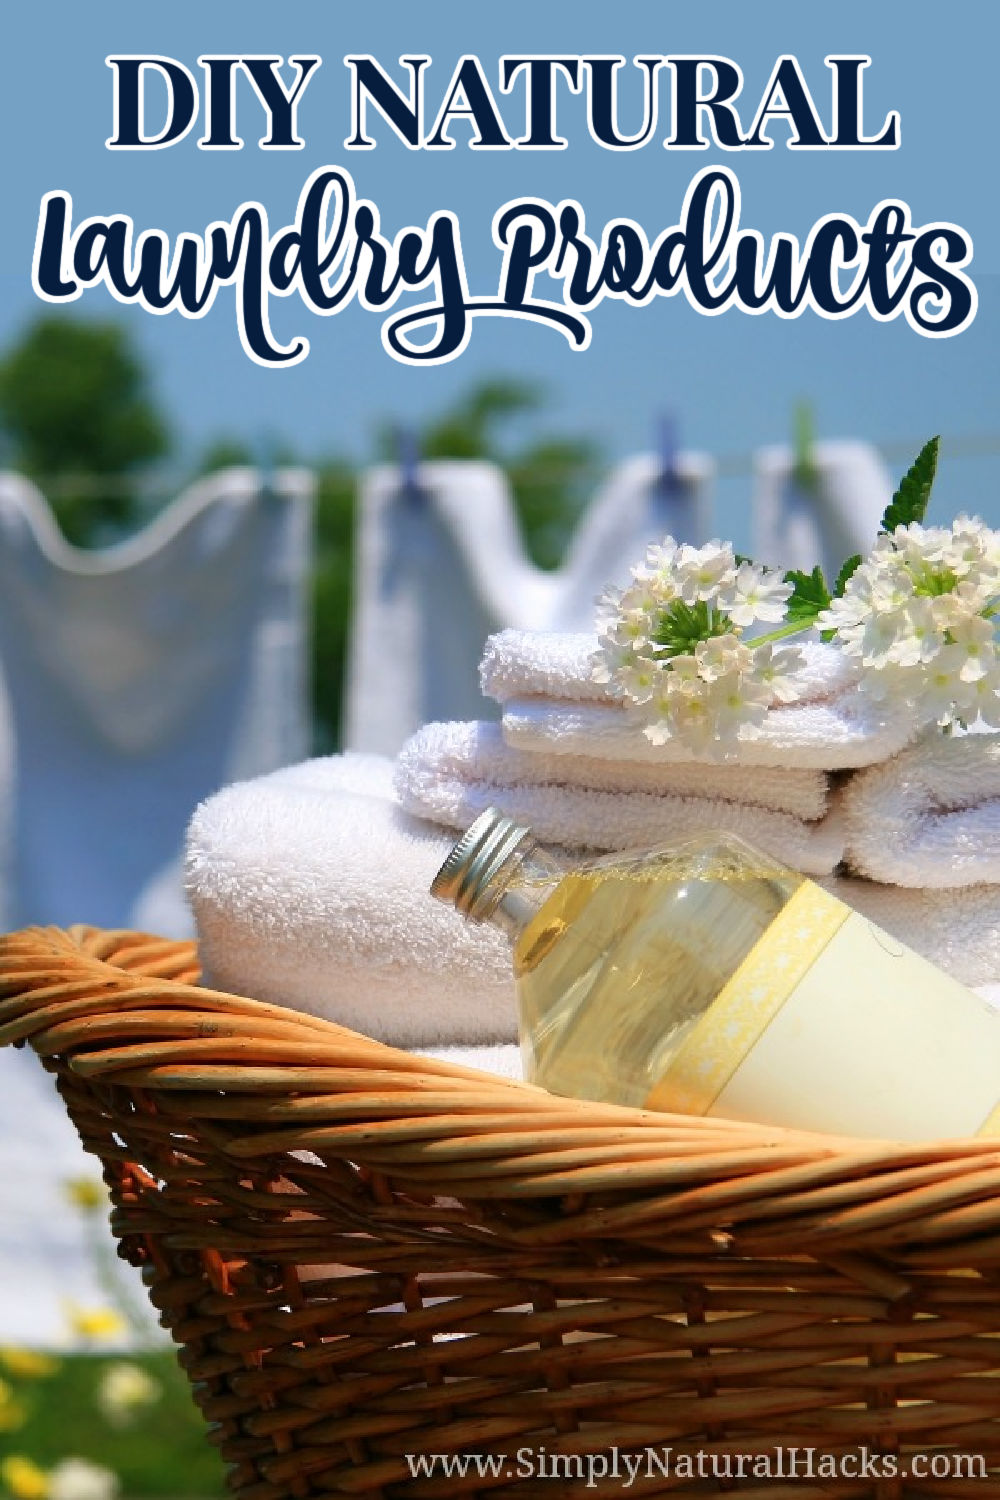 folded towels in a basket with natural laundry soap